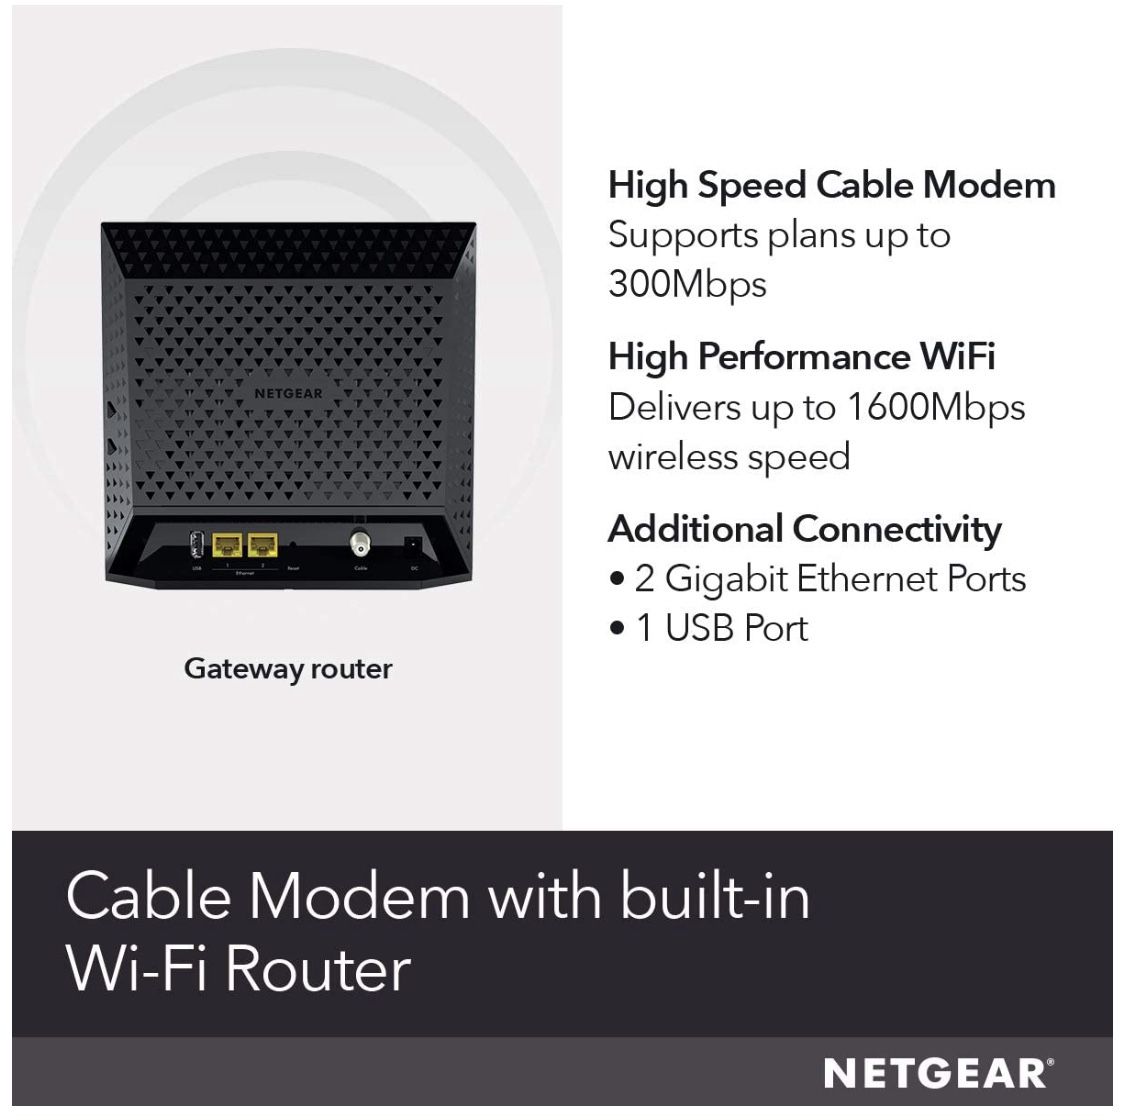 NETGEAR Modem & WiFi Router Combo C6250 - Compatible with all Cable Providers